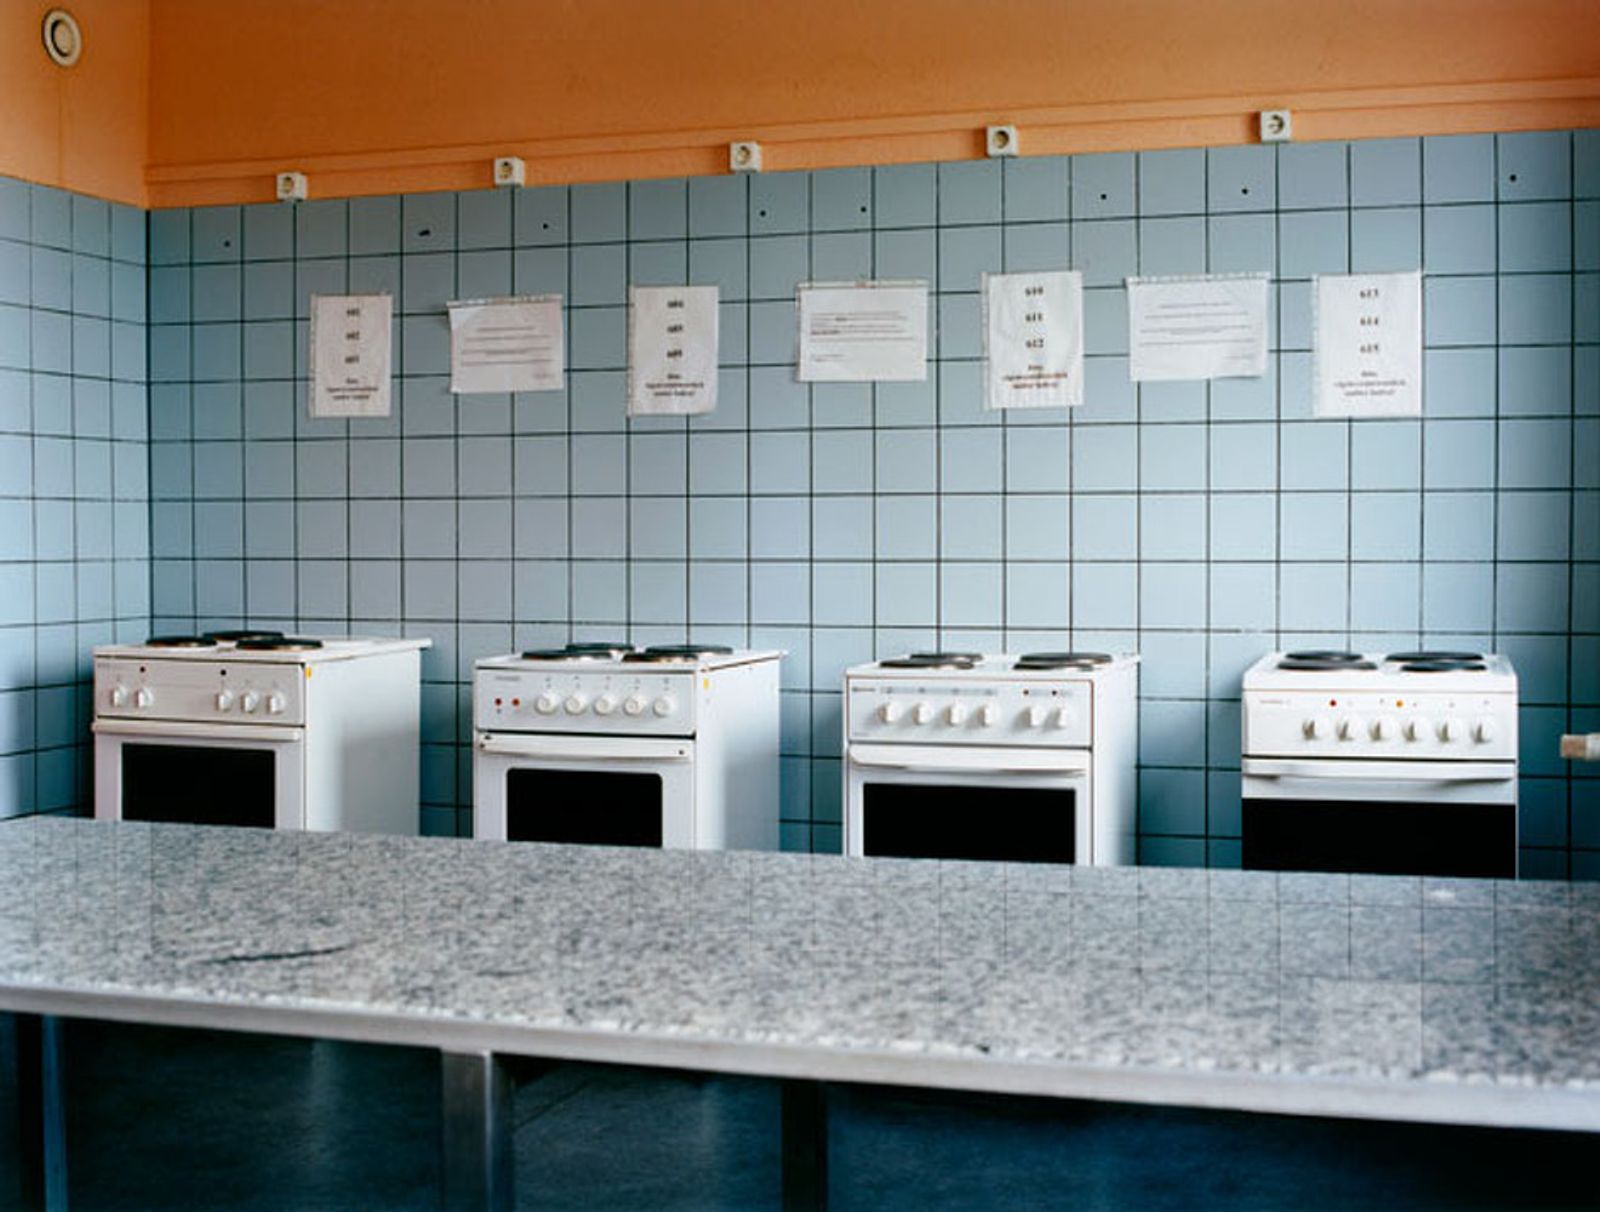 © Sibylle Fendt - Community kitchen in a Berlin residence for refugees